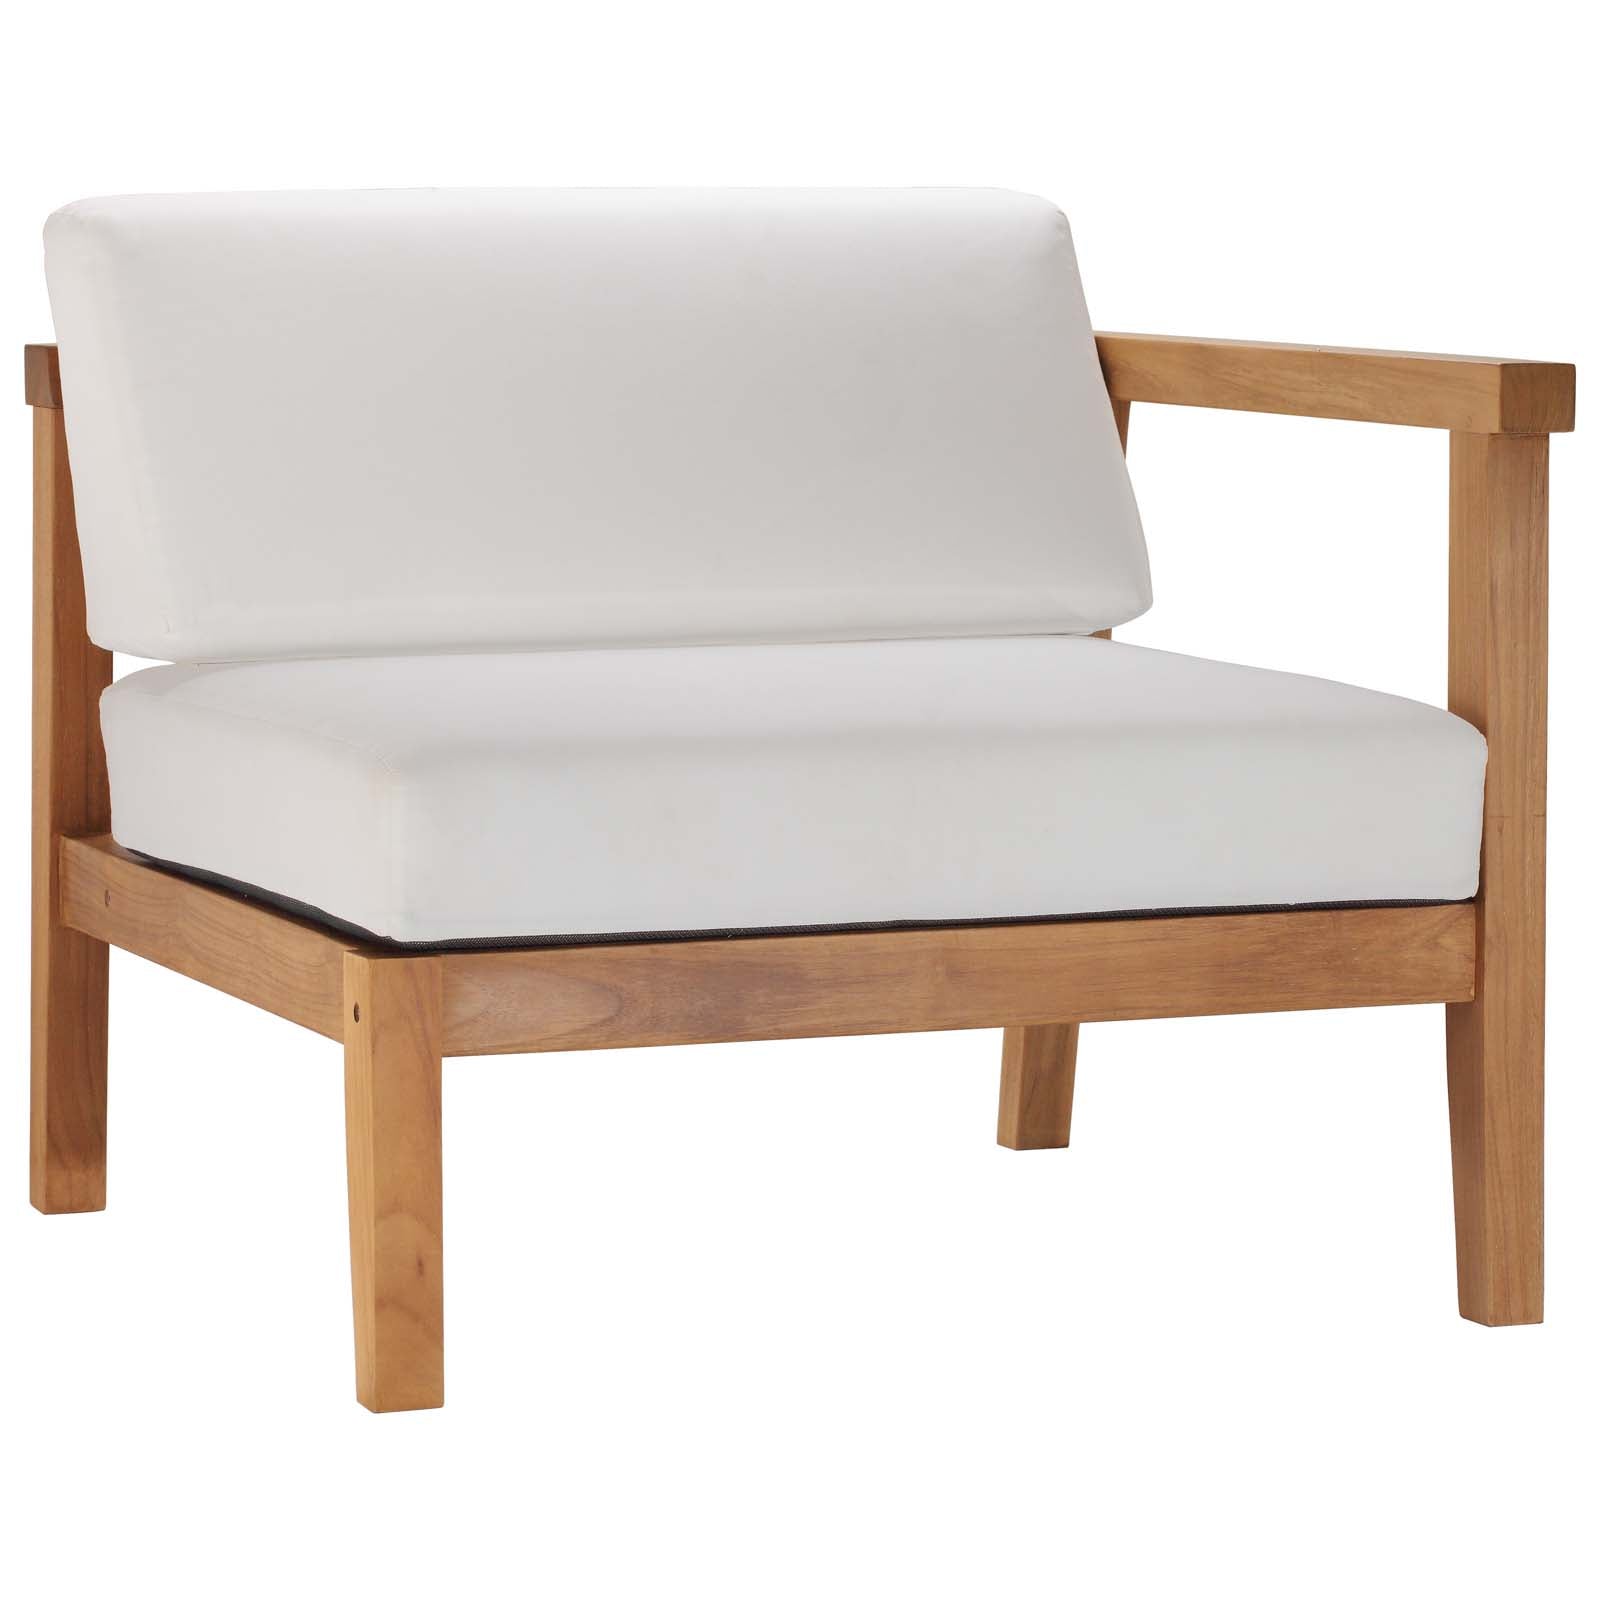 Modway Outdoor Sofas - Bayport-Outdoor-Patio-Teak-Wood-Right-Arm-Chair-Natural-White